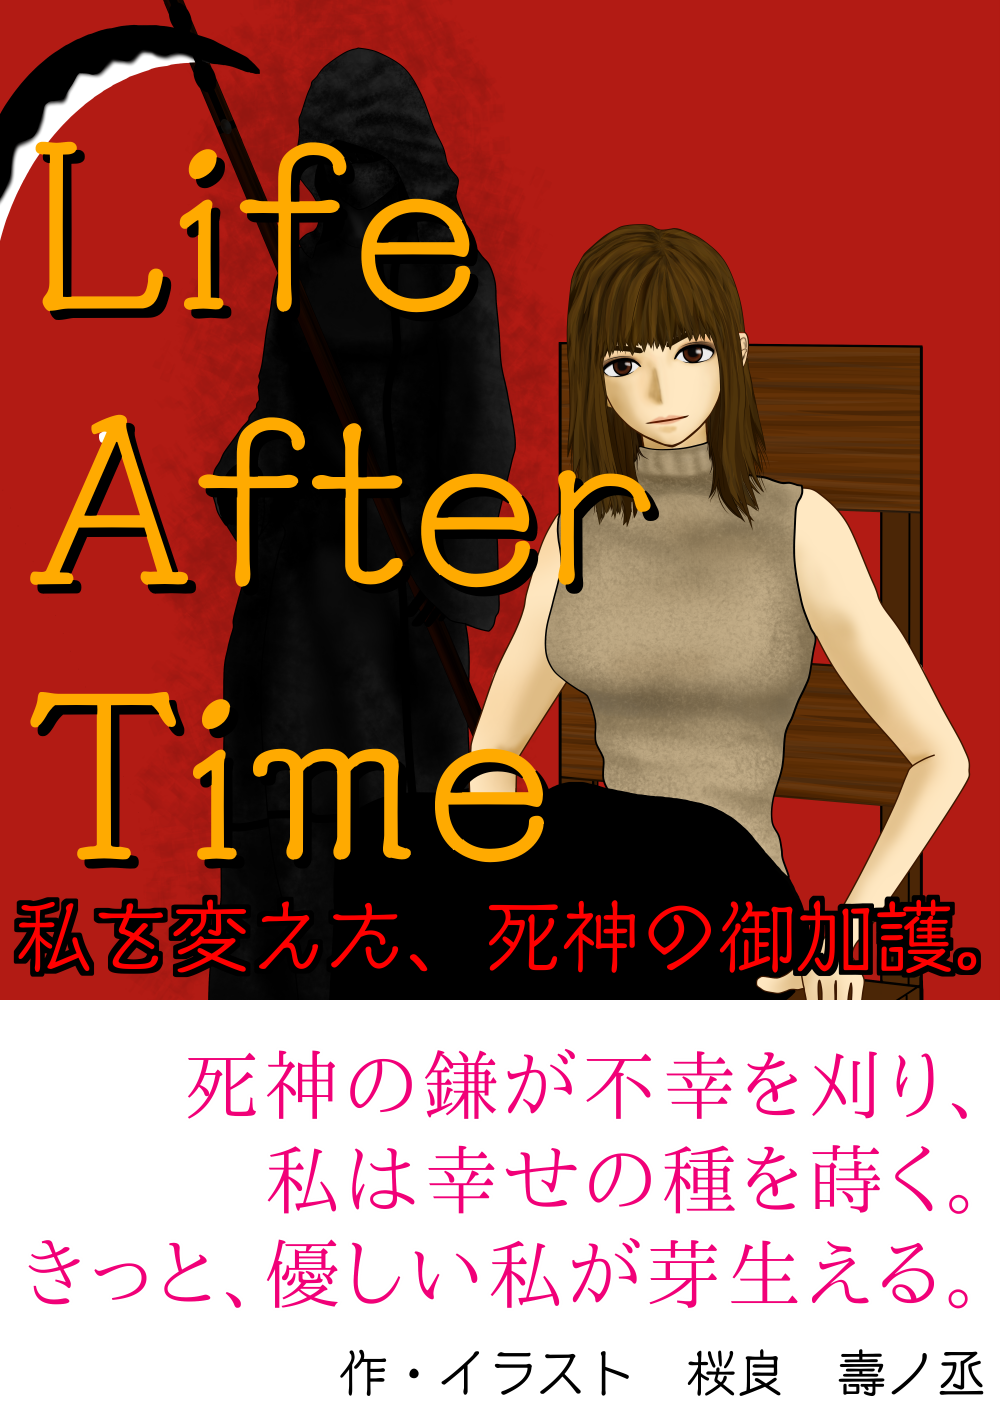 【Life After Time】〜私を変えた、死神の御加護〜